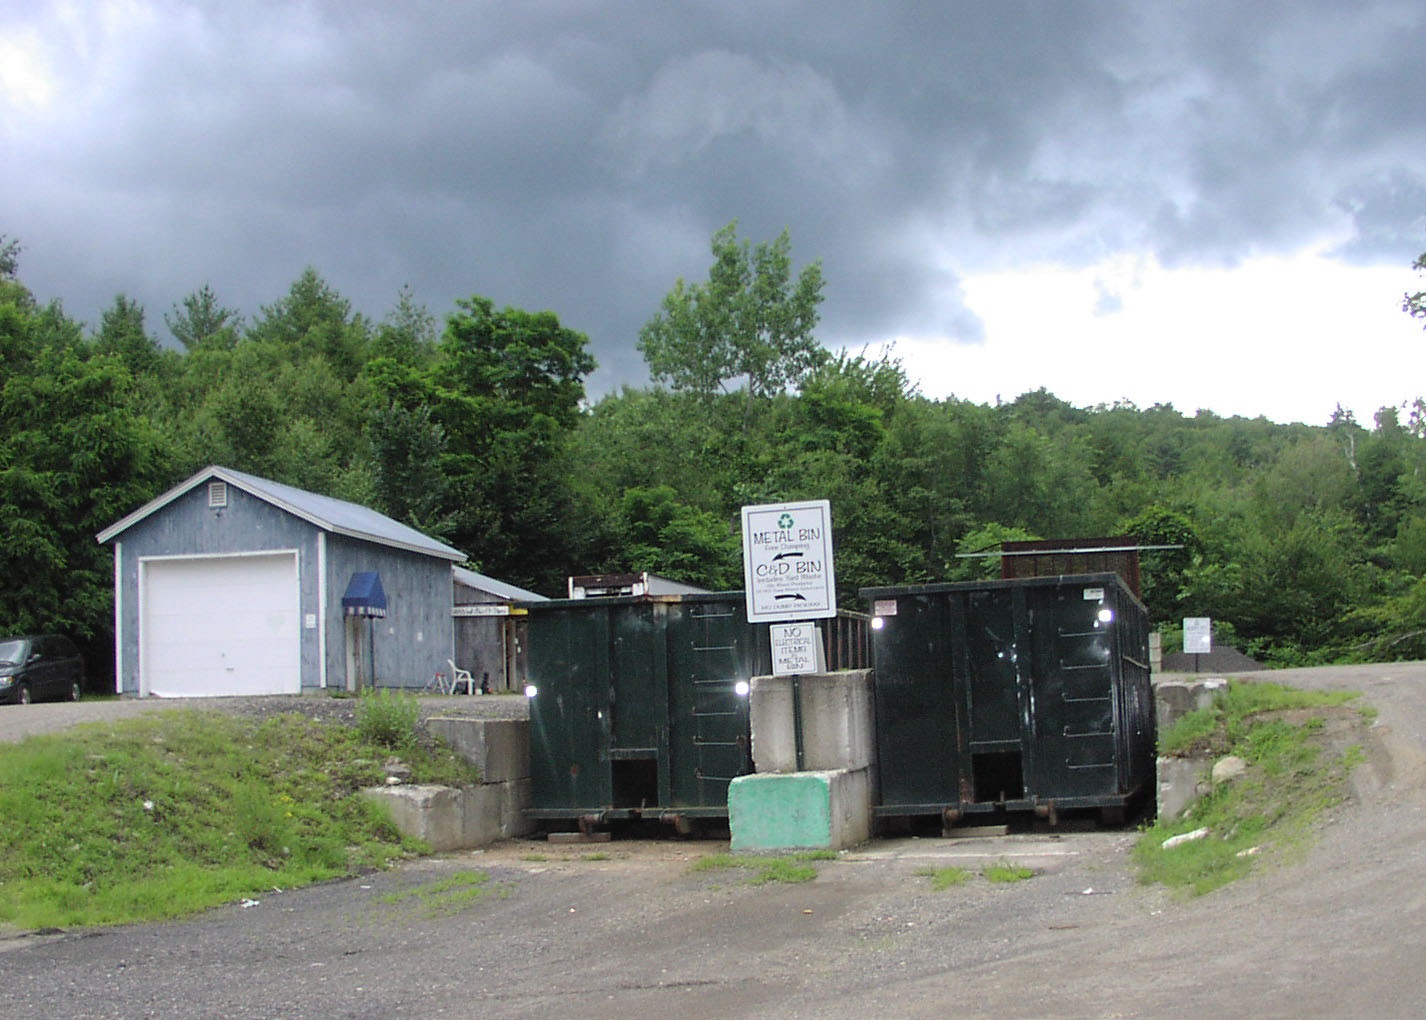 An image of a transfer station